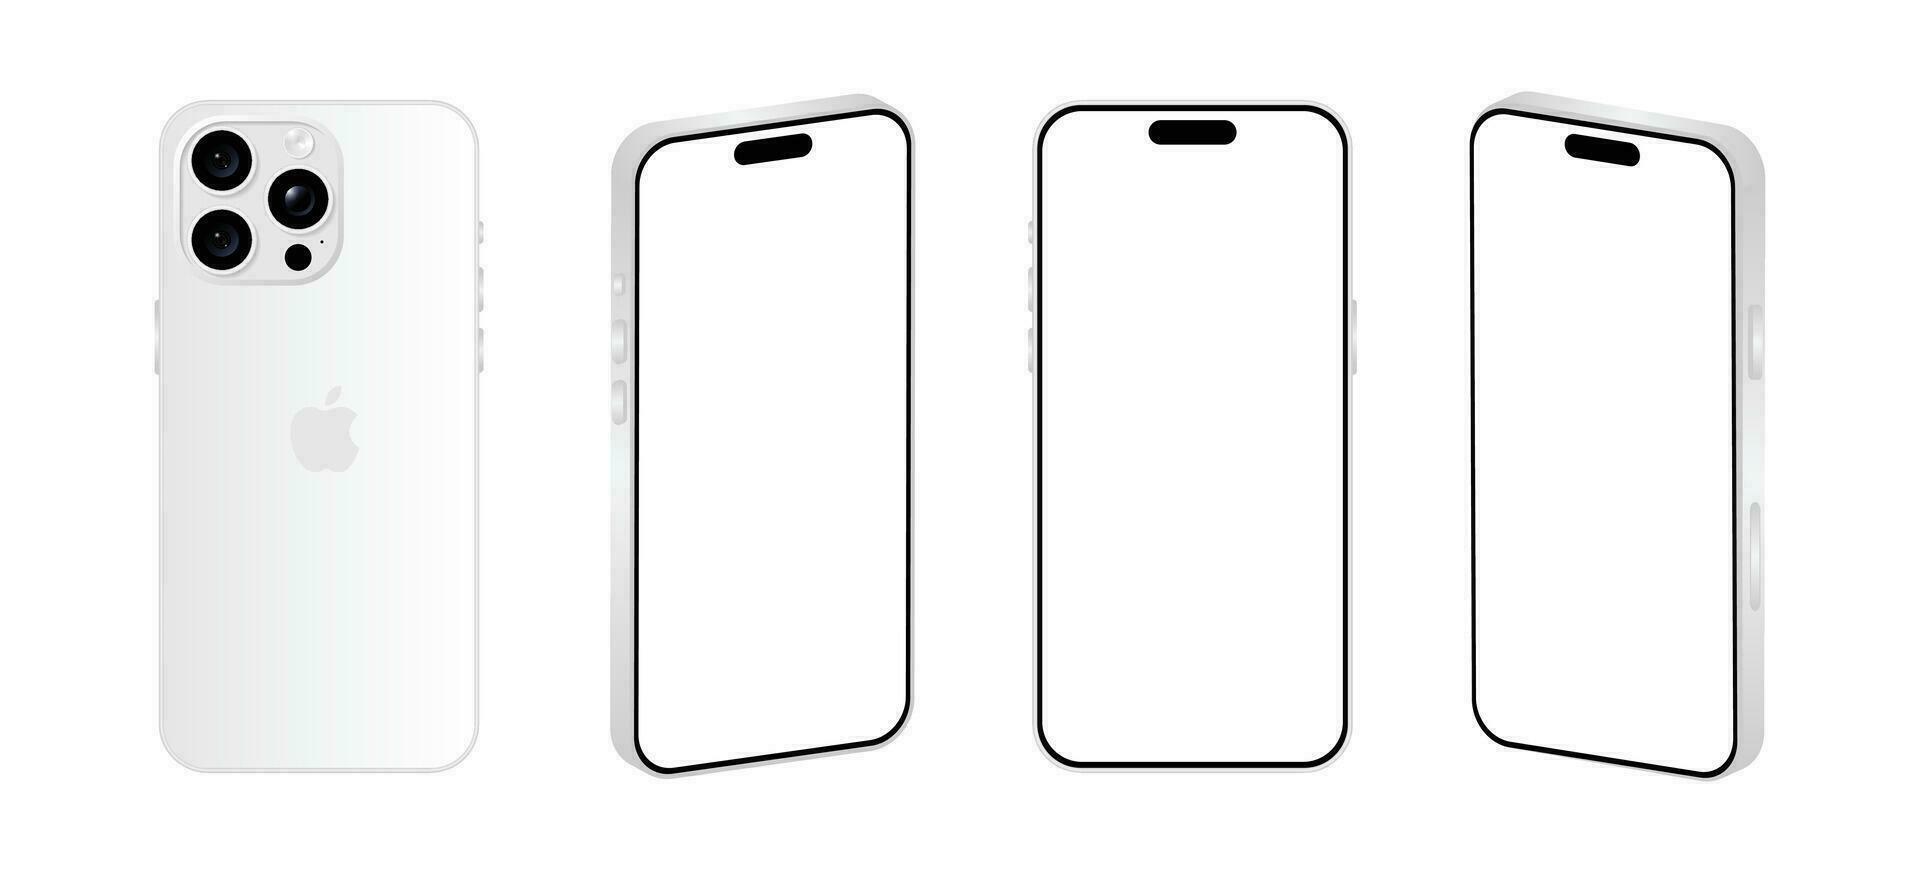 Iphone 15 Pro model. White titanium color. Front view, back view and different view. Vector mockup. Vector illustration